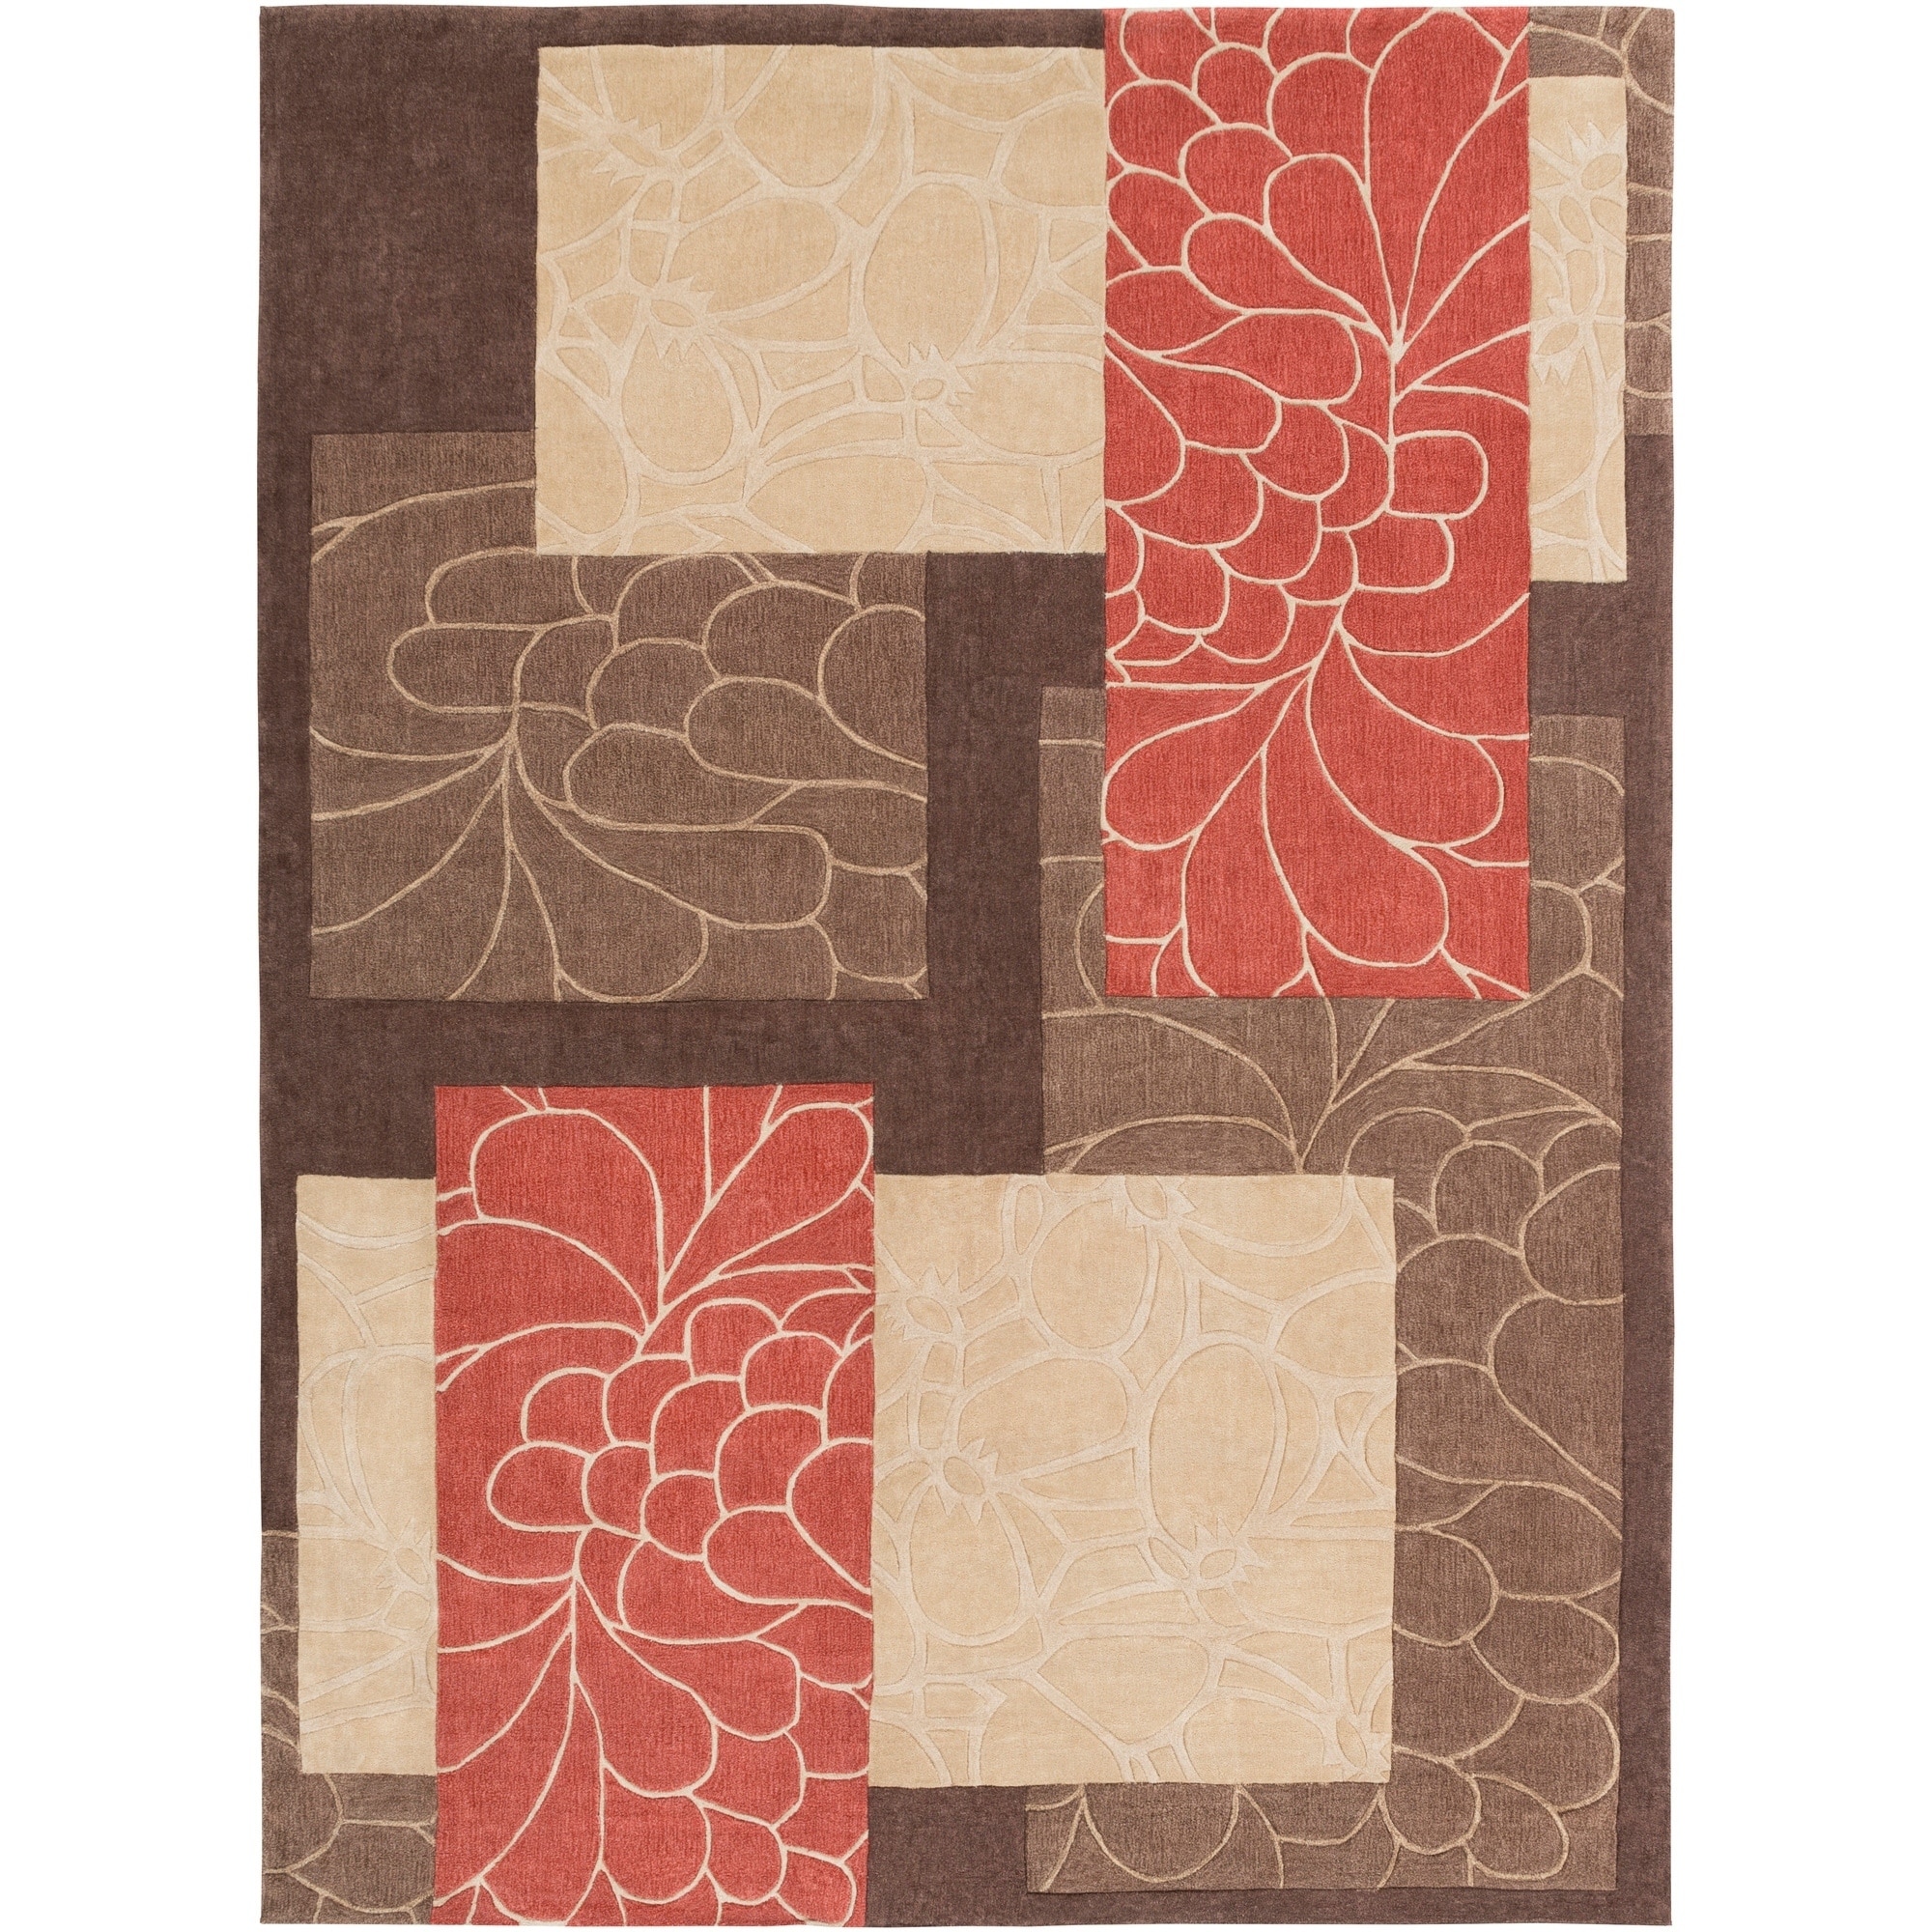 Hand tufted Brown Floral Squares Rug (8 X 11)